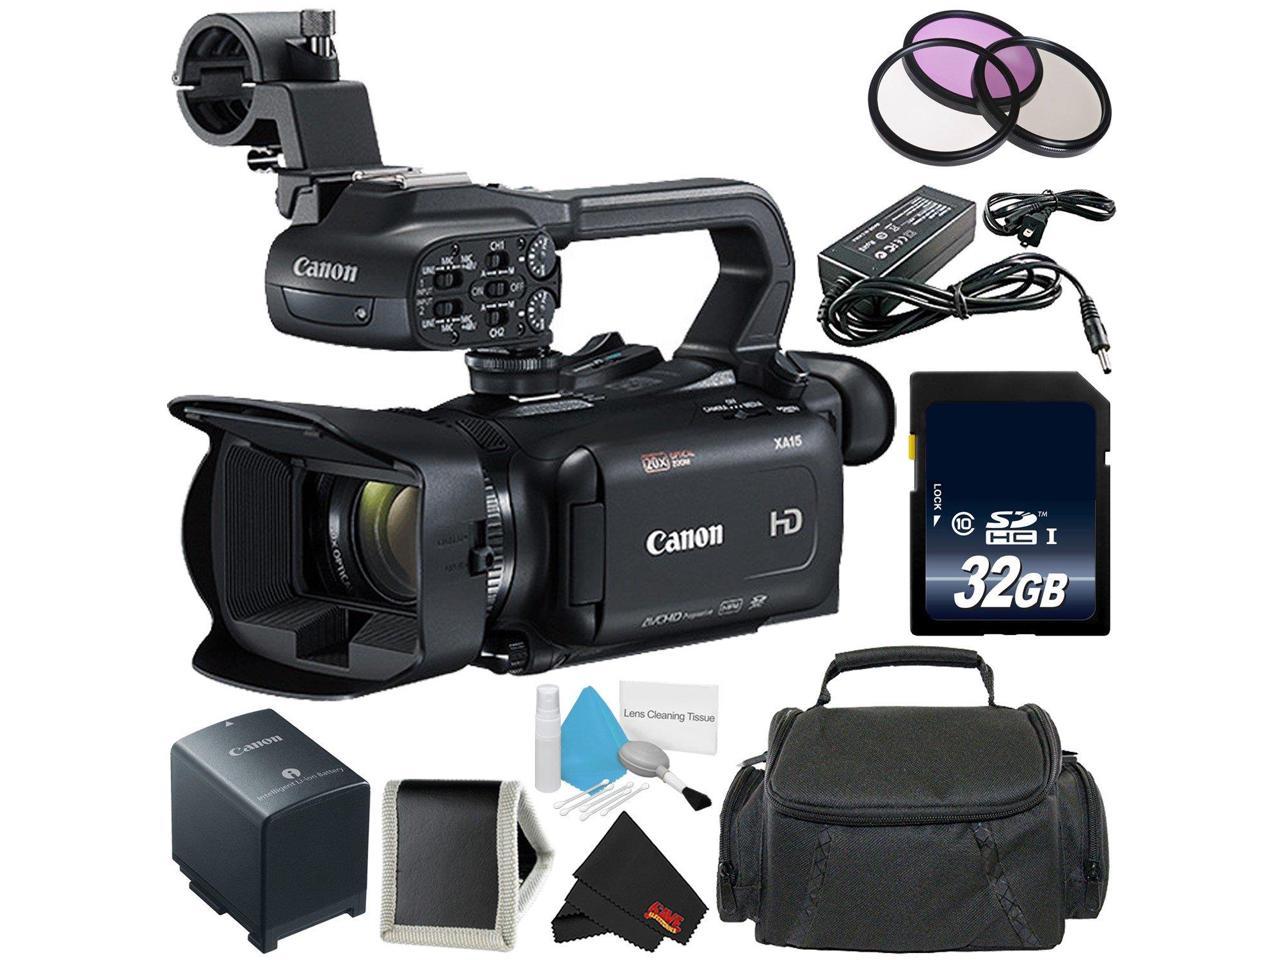 Canon XA11 Compact Professional Camcorder - Full HD with HDMI and Composite Output - Bundle with 32GB Memory Card + More